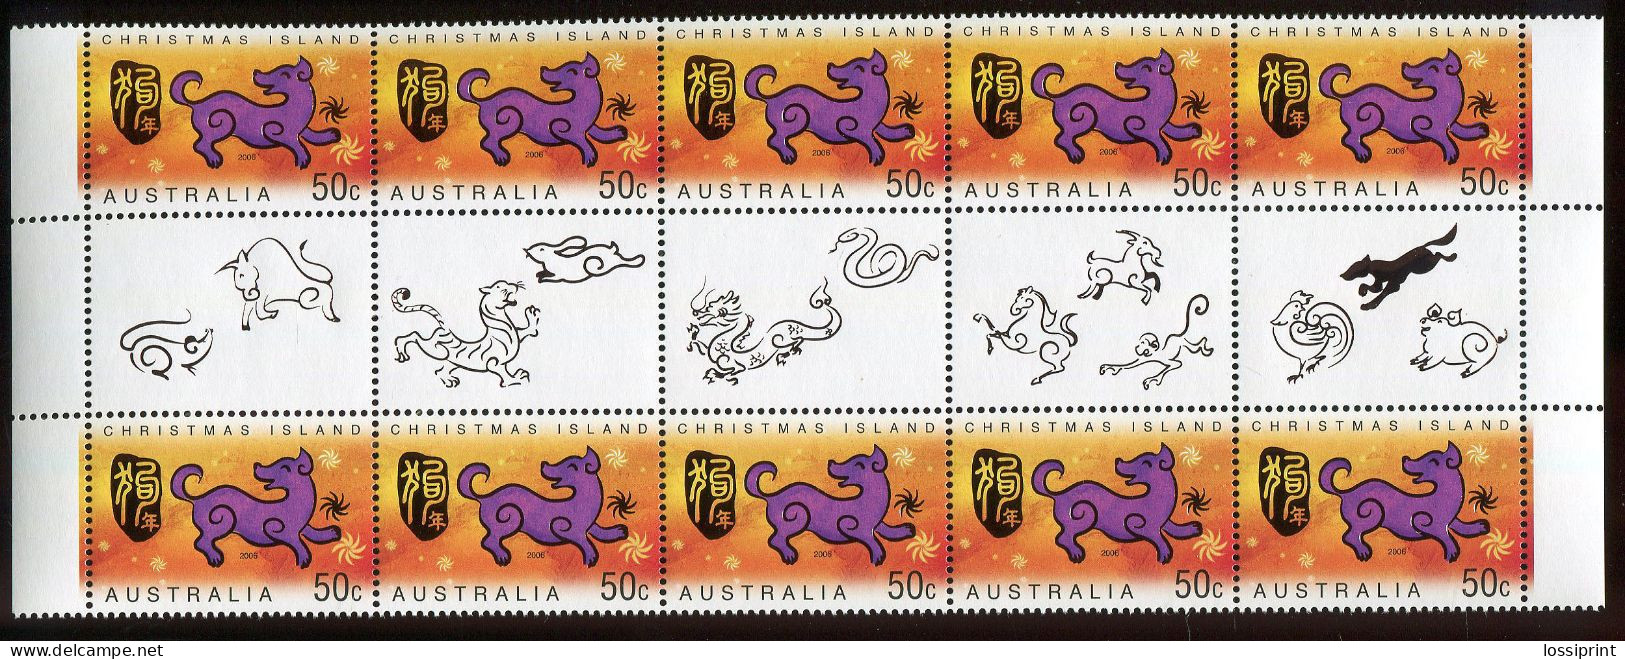 Christmas Island:Australia:Unused Stamps Ribbons With Coupons, Chinese Year Of The Dog, 2006, MNH - Christmas Island